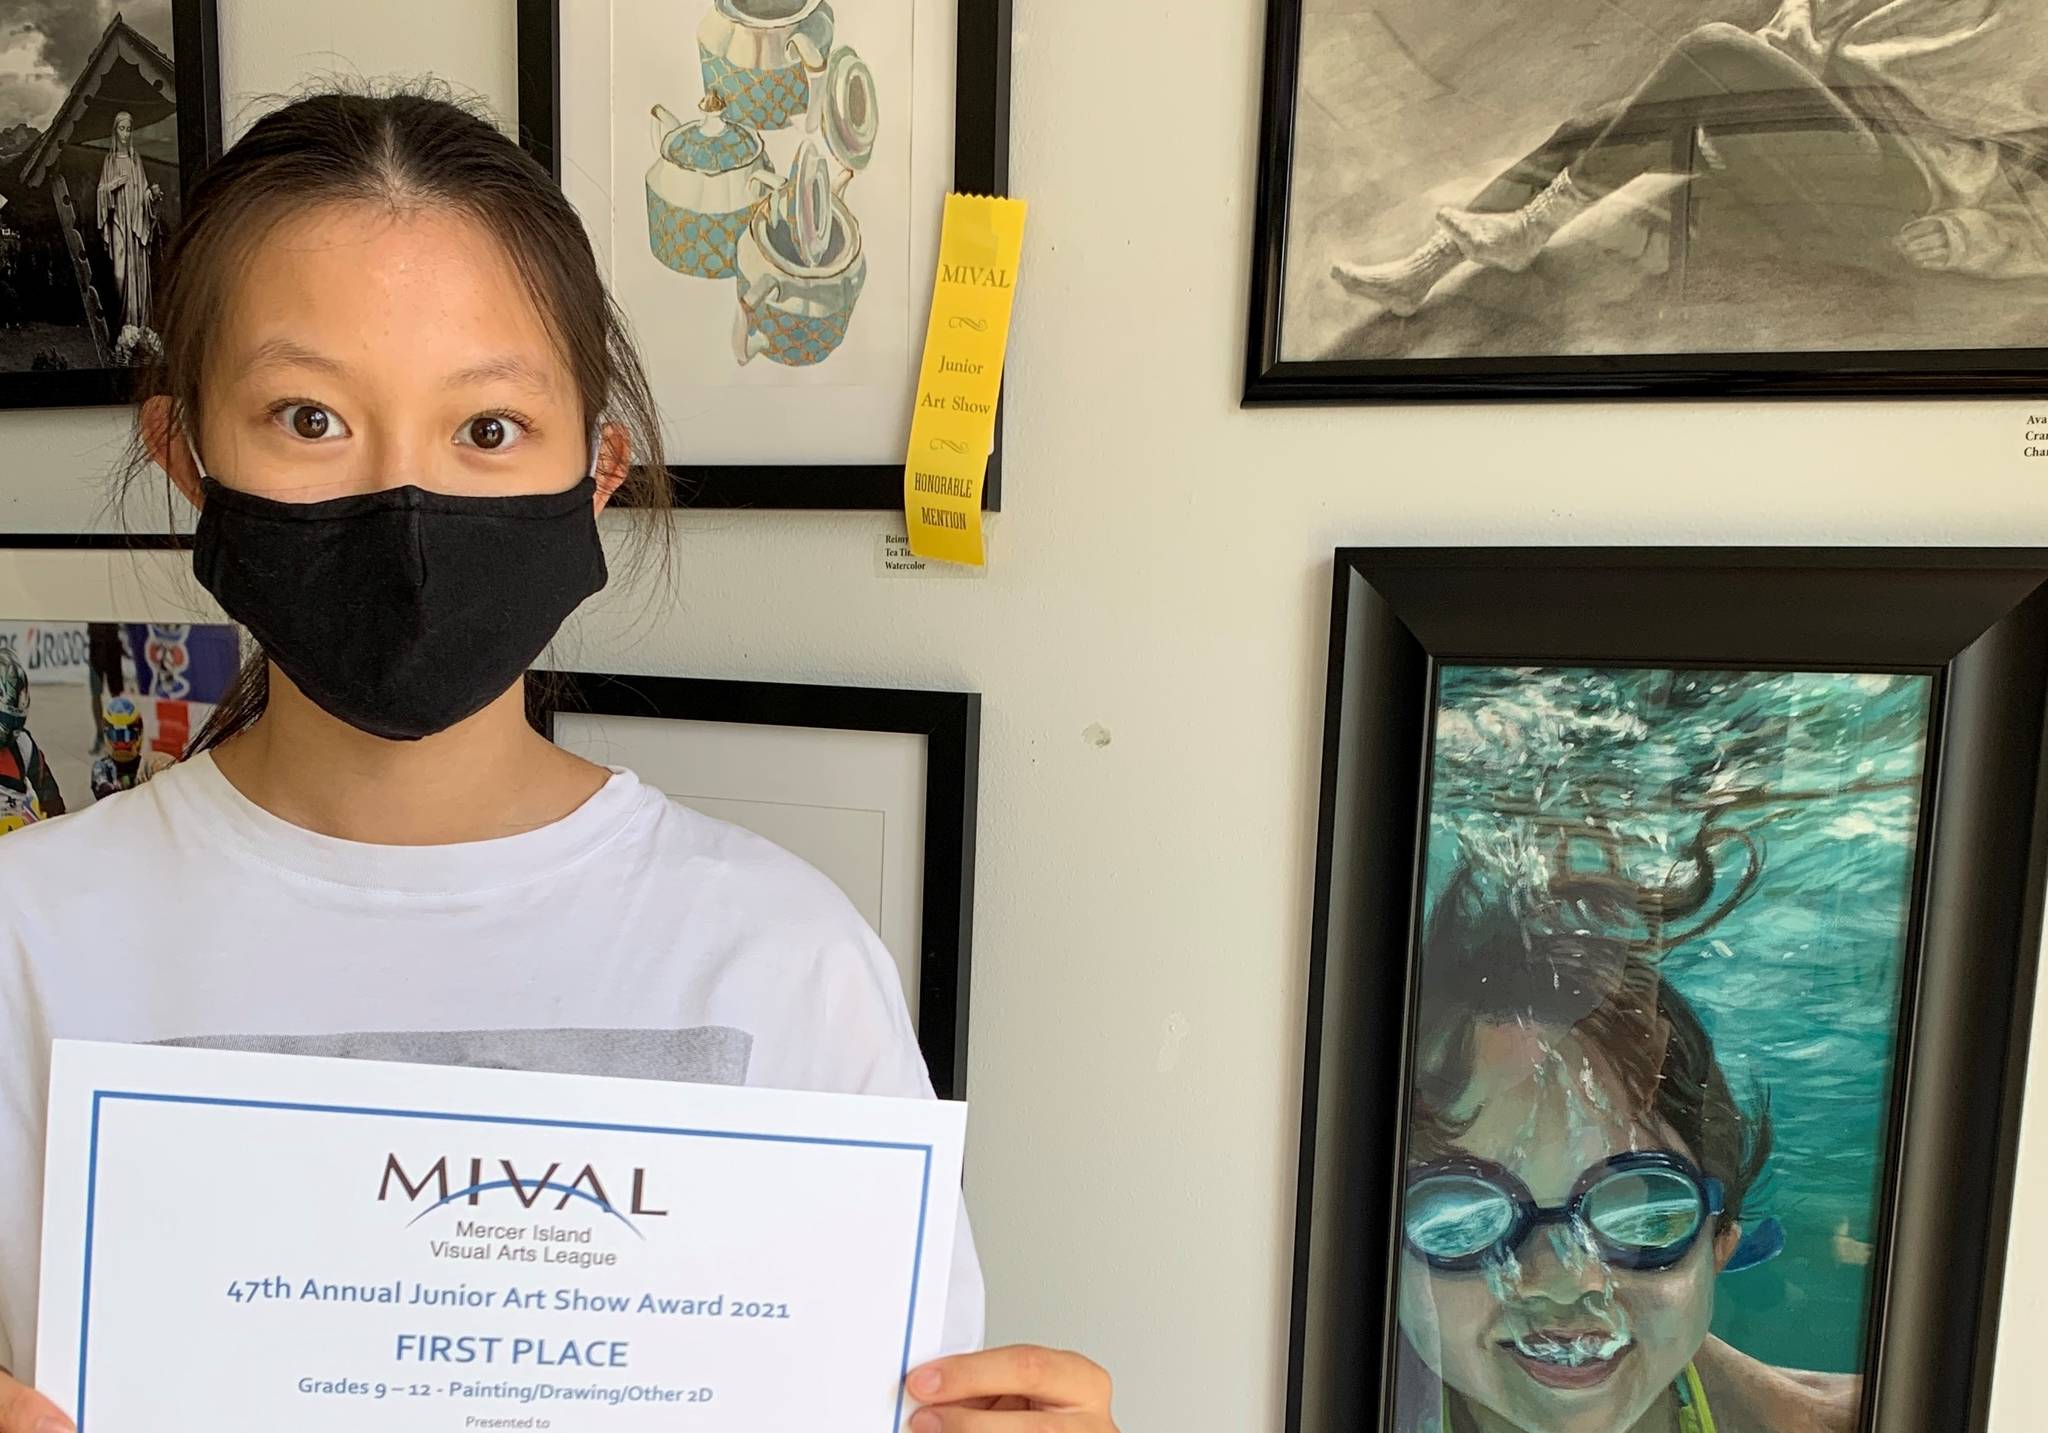 Ninth-grader Ava Yeh stands with her first-place acrylic painting, “An Astronomical Swim,” in the category for 2D art for grades 9-12 at the Mercer Island Visual Arts League (MIVAL) Junior Arts Show. The 47-year tradition continues at the MIVAL Gallery, 2836 78th Ave. SE, through Aug. 27. The gallery is open from noon to 6 p.m. Thursday-Saturday and noon to 4 p.m. Sunday. The show, which is sponsored by MIVAL, Wells Fargo Bank and Coldwell Banker Bain, hosts artwork by children in grades K-12 and includes drawing, painting, photography, ceramics, other 3D art and digitally produced images. Photo courtesy of the Mercer Island Visual Arts League